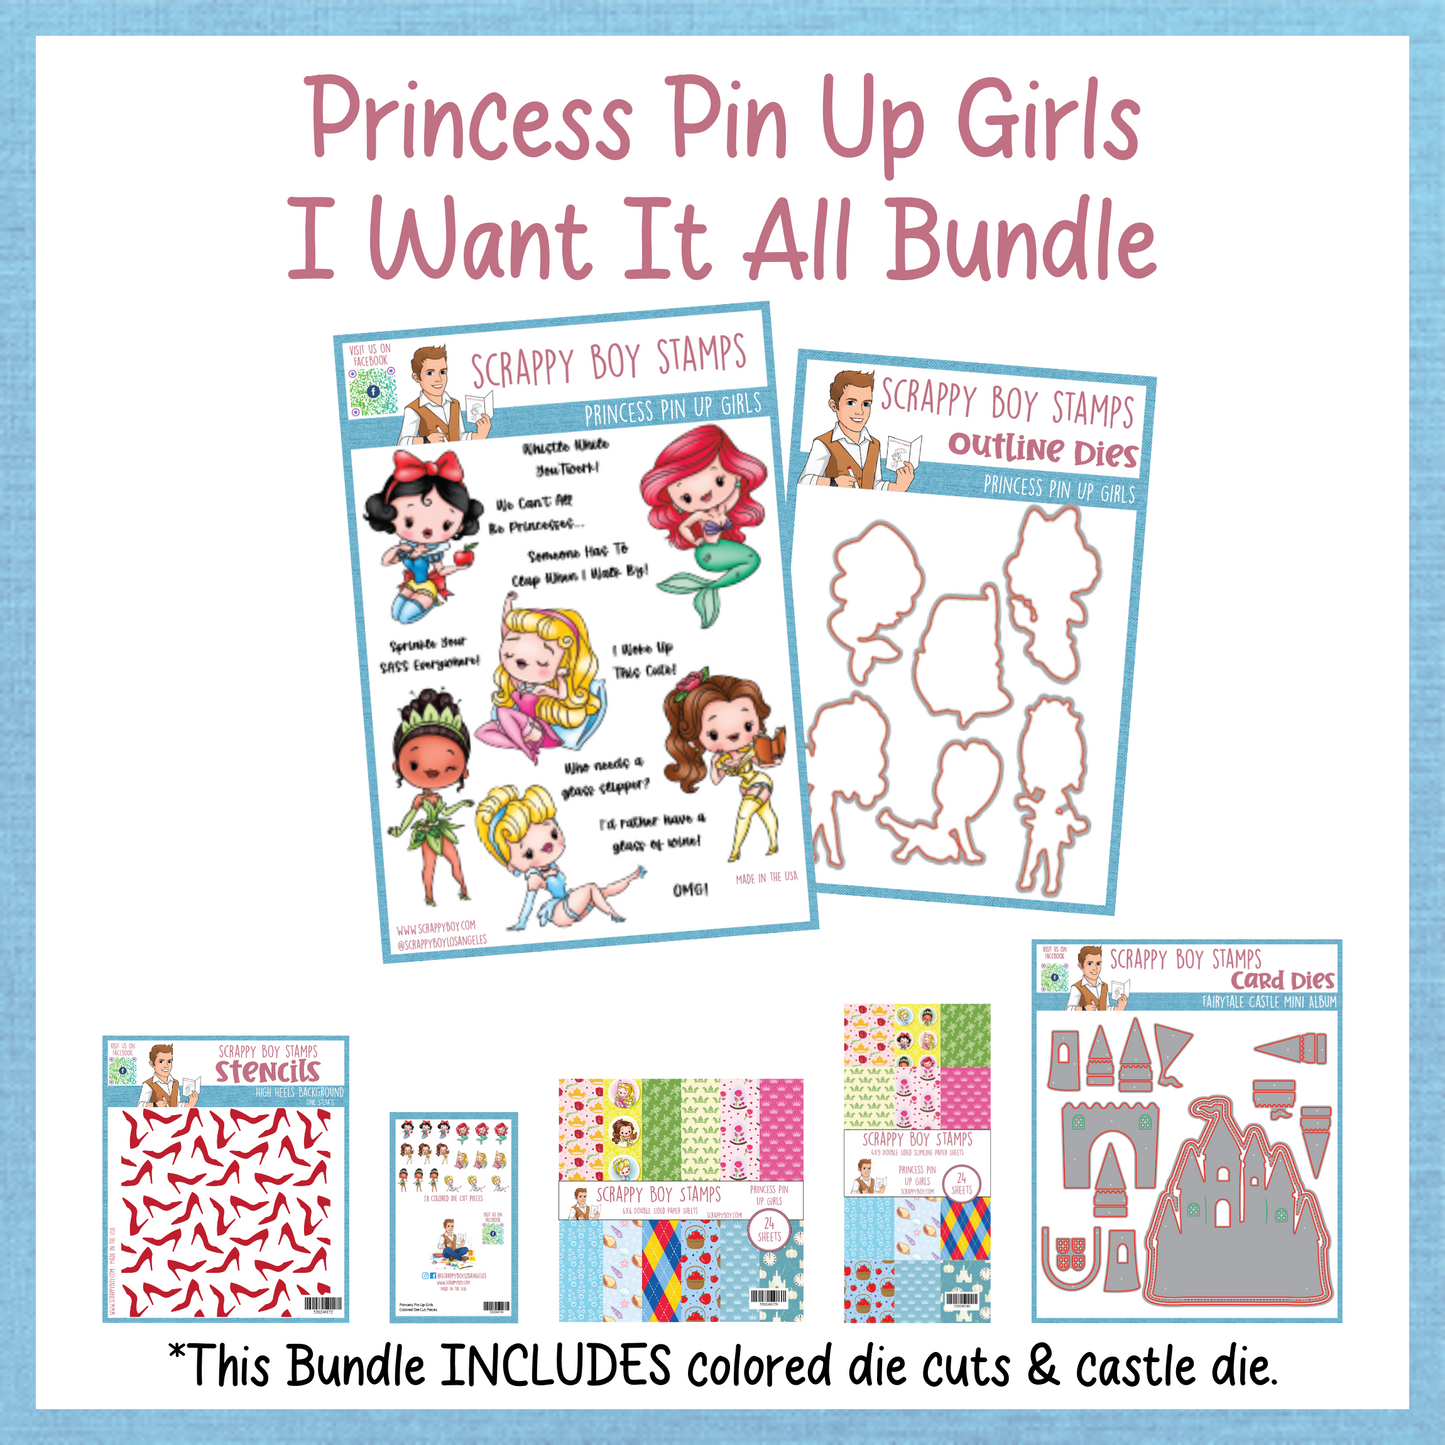 I Want It All Bundle - Princess Pin Up Girls Release Scrappy Boy Stamps